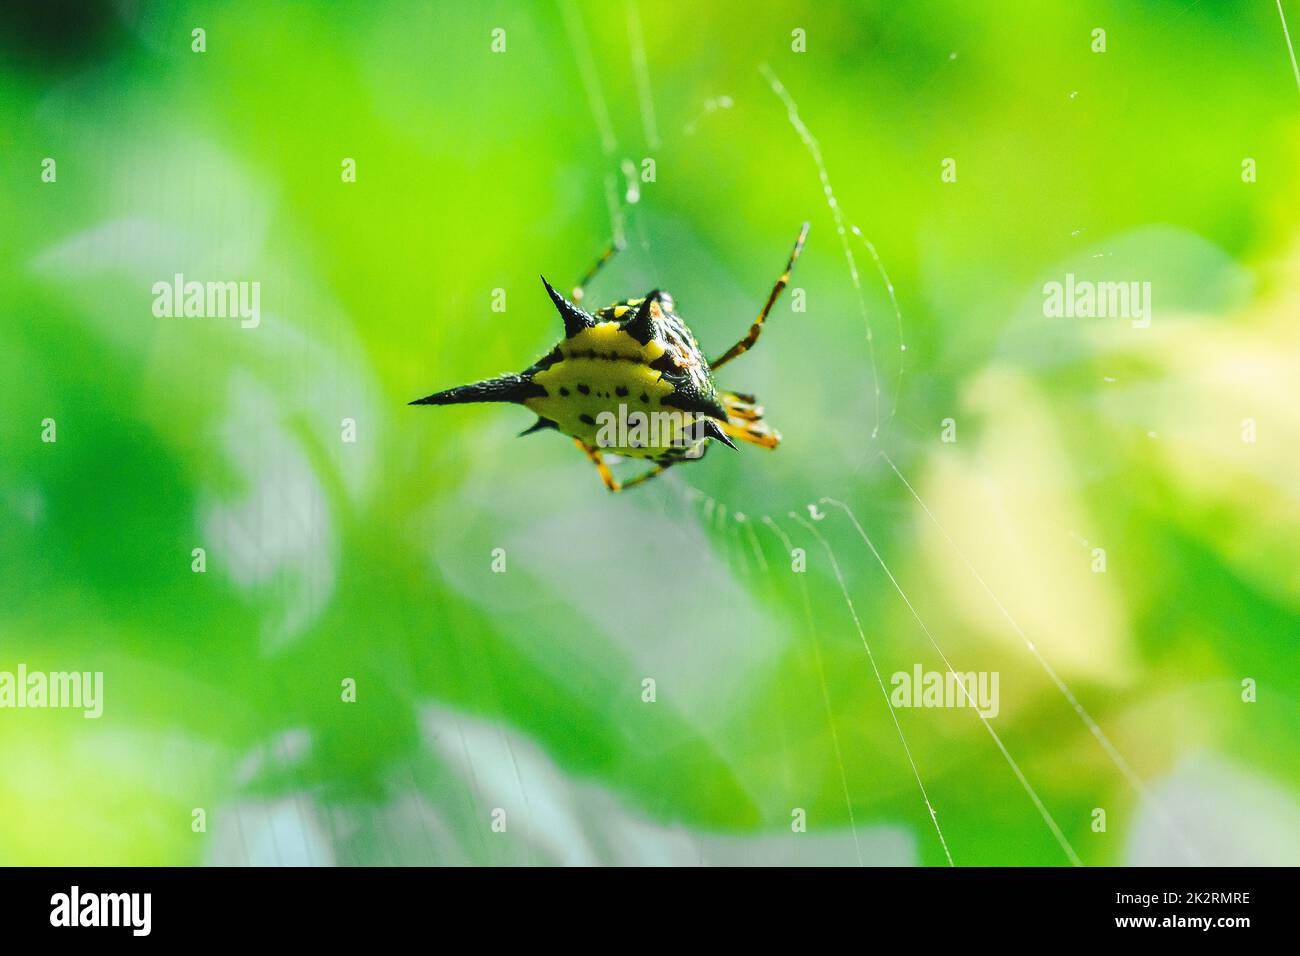 Spiny Orb Weaver in nature can be found all over the world but without danger. Stock Photo